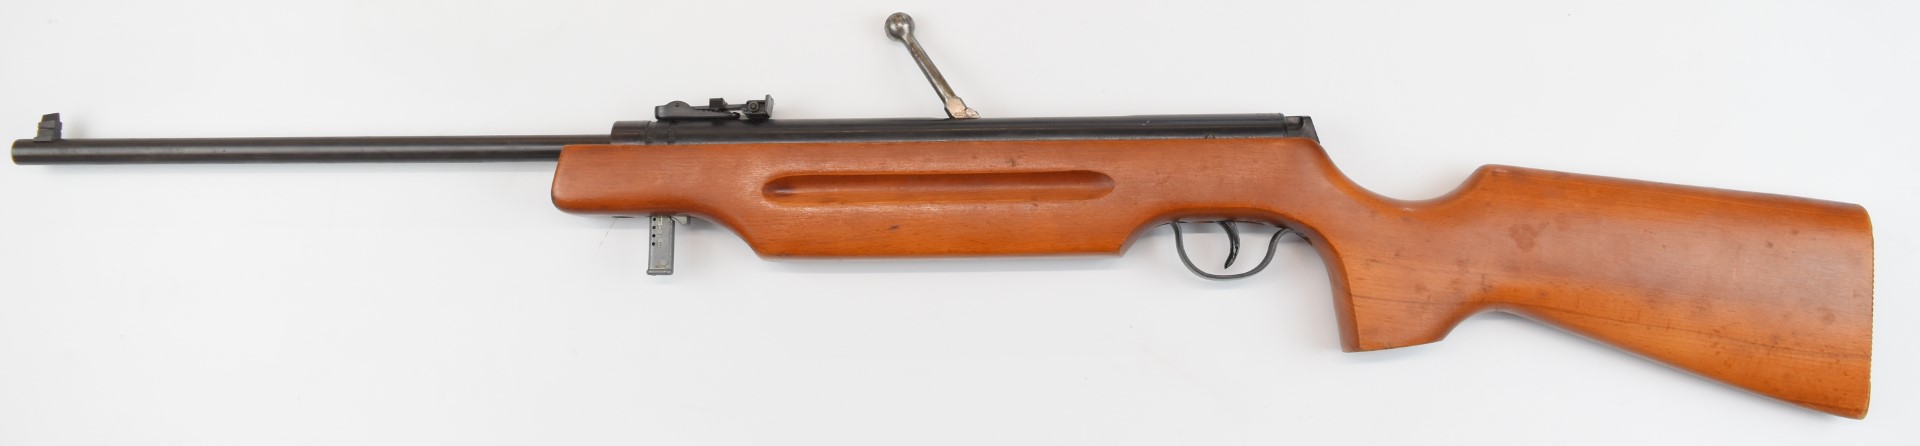 Haenel Model 310 lever-action 4.4mm calibre air rifle with semi-pistol grip, adjustable sights and - Image 12 of 19